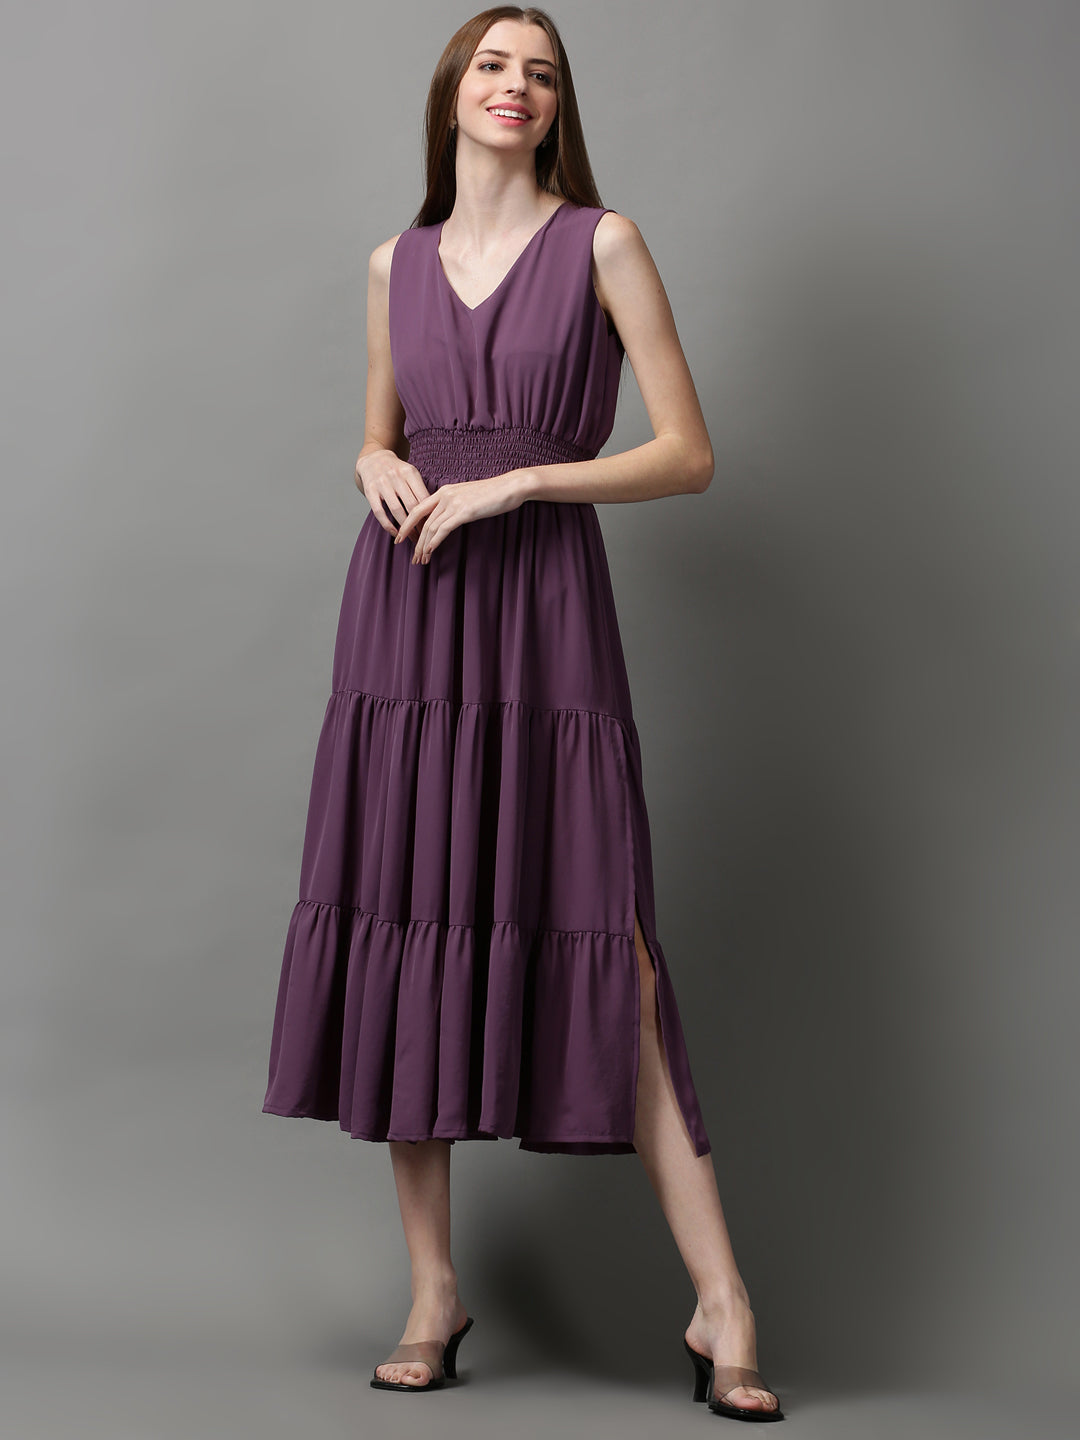 Women's Purple Solid Fit and Flare Dress